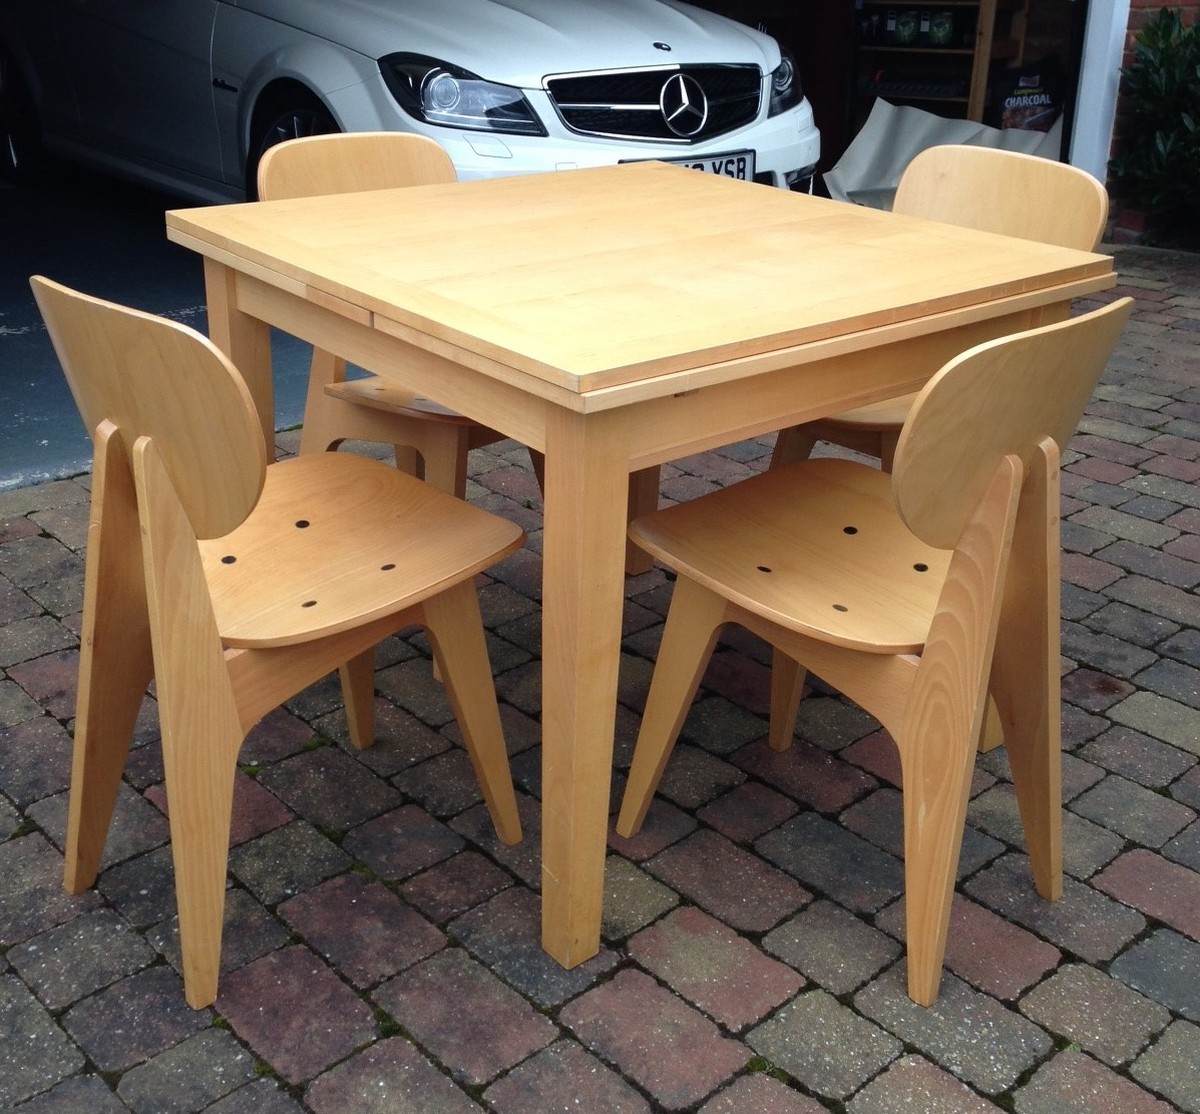 Second hand wooden table